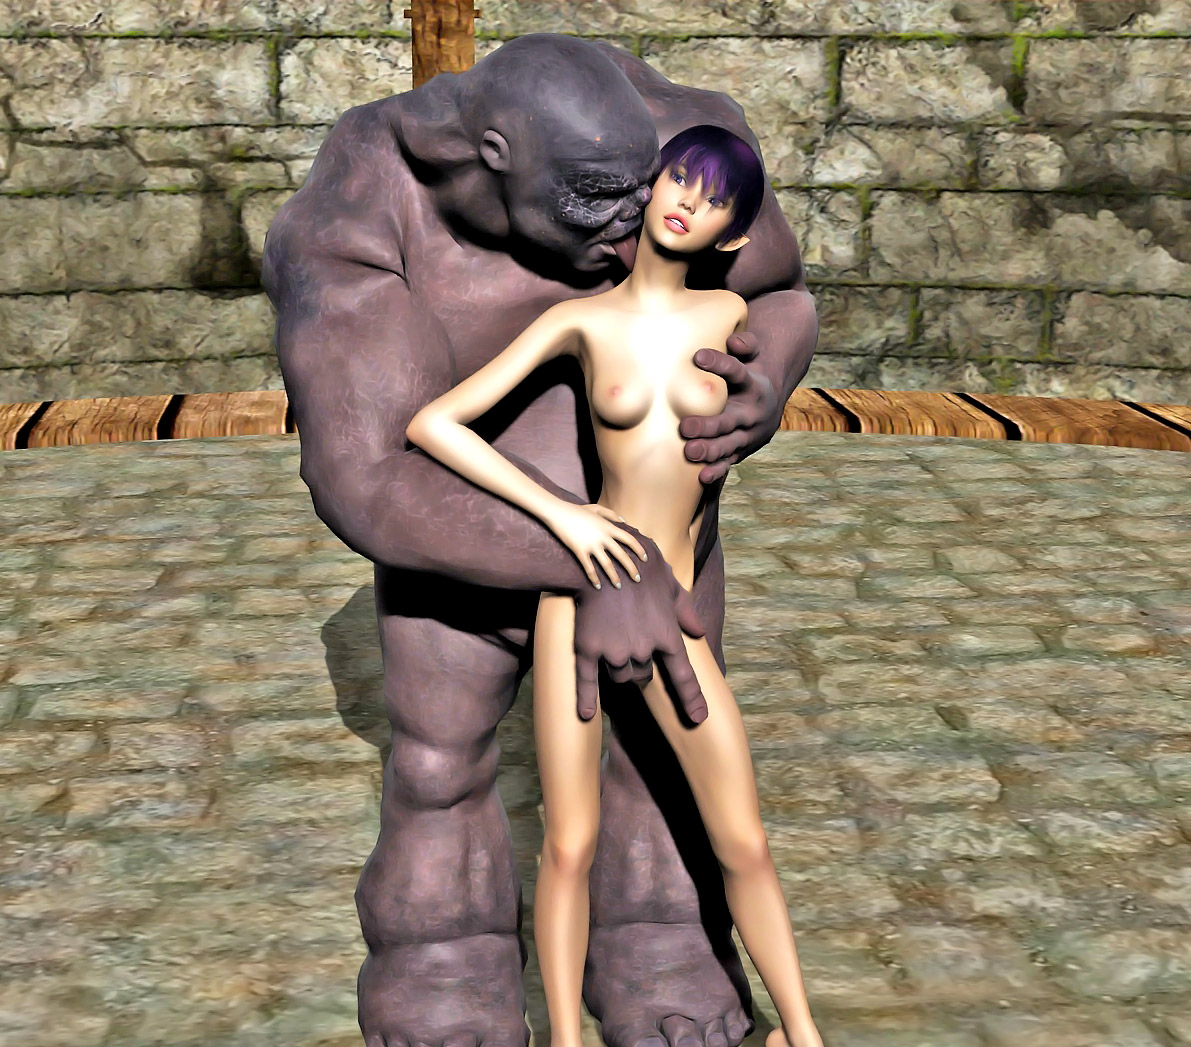 3d Forced Monster Sex Elf - 3d elf porn with cute babes forced by terrible monsters | Porncraft 3d